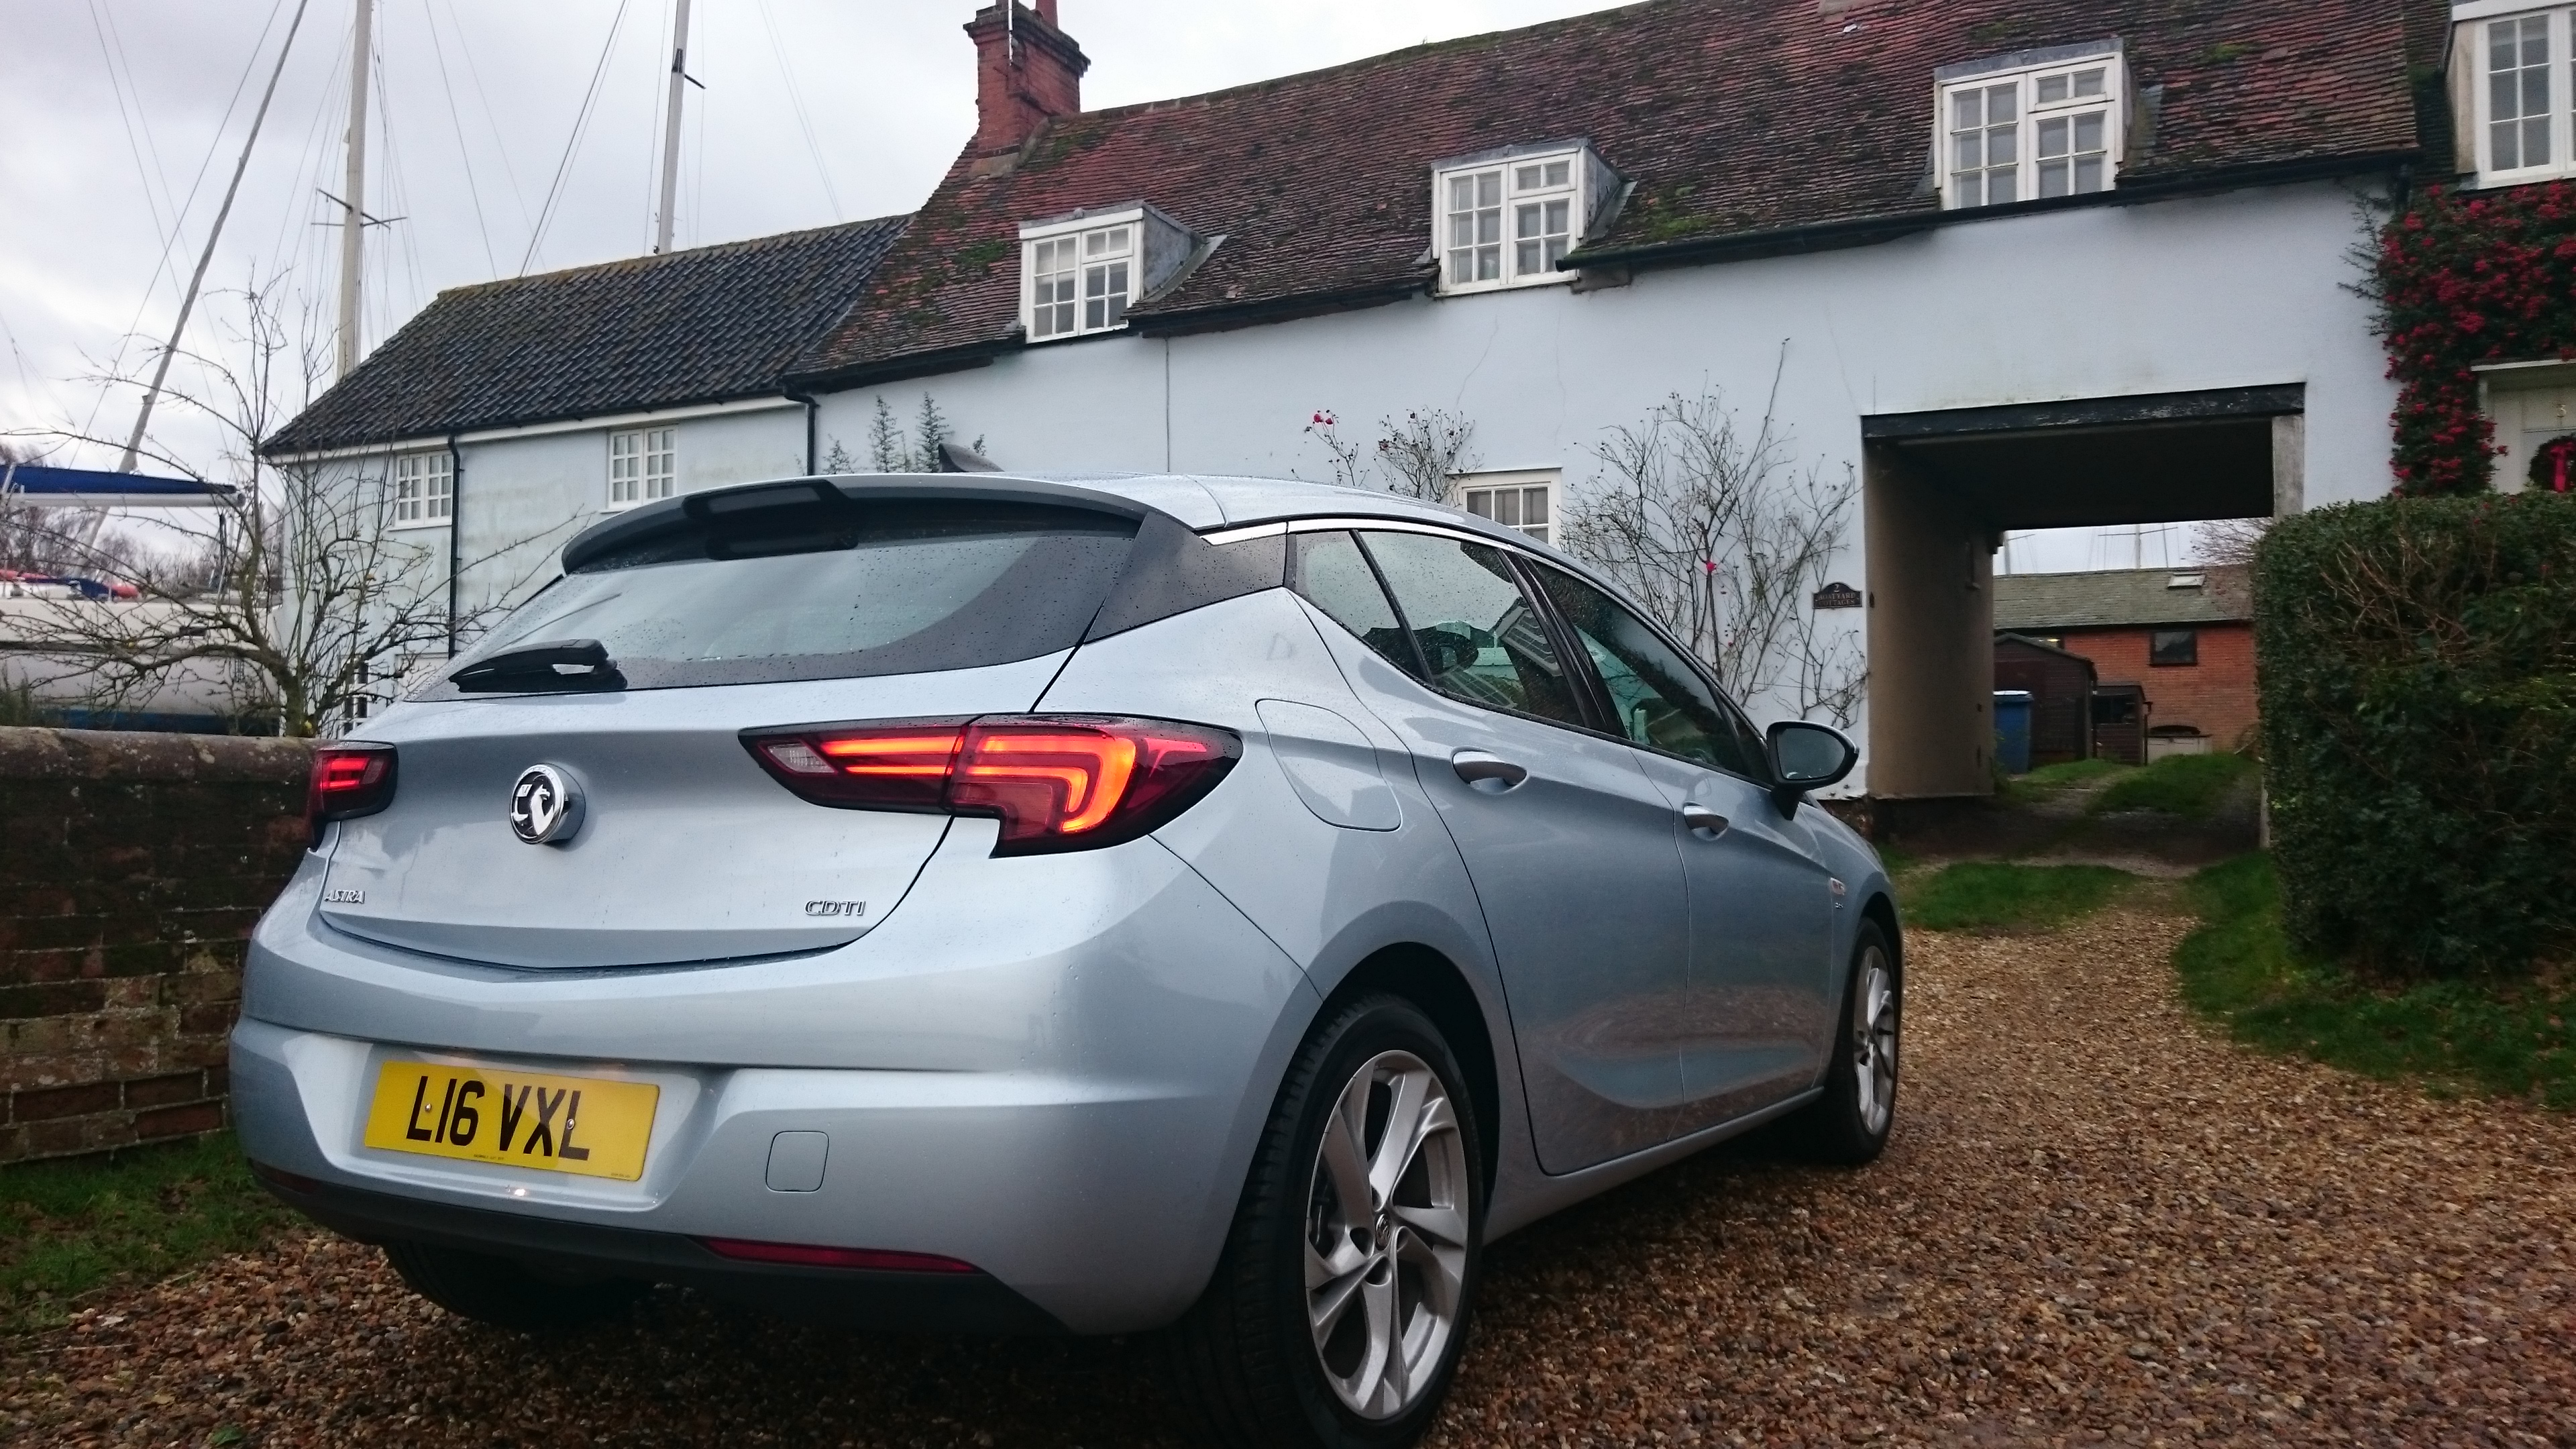 Escape the City in the New Vauxhall Astra